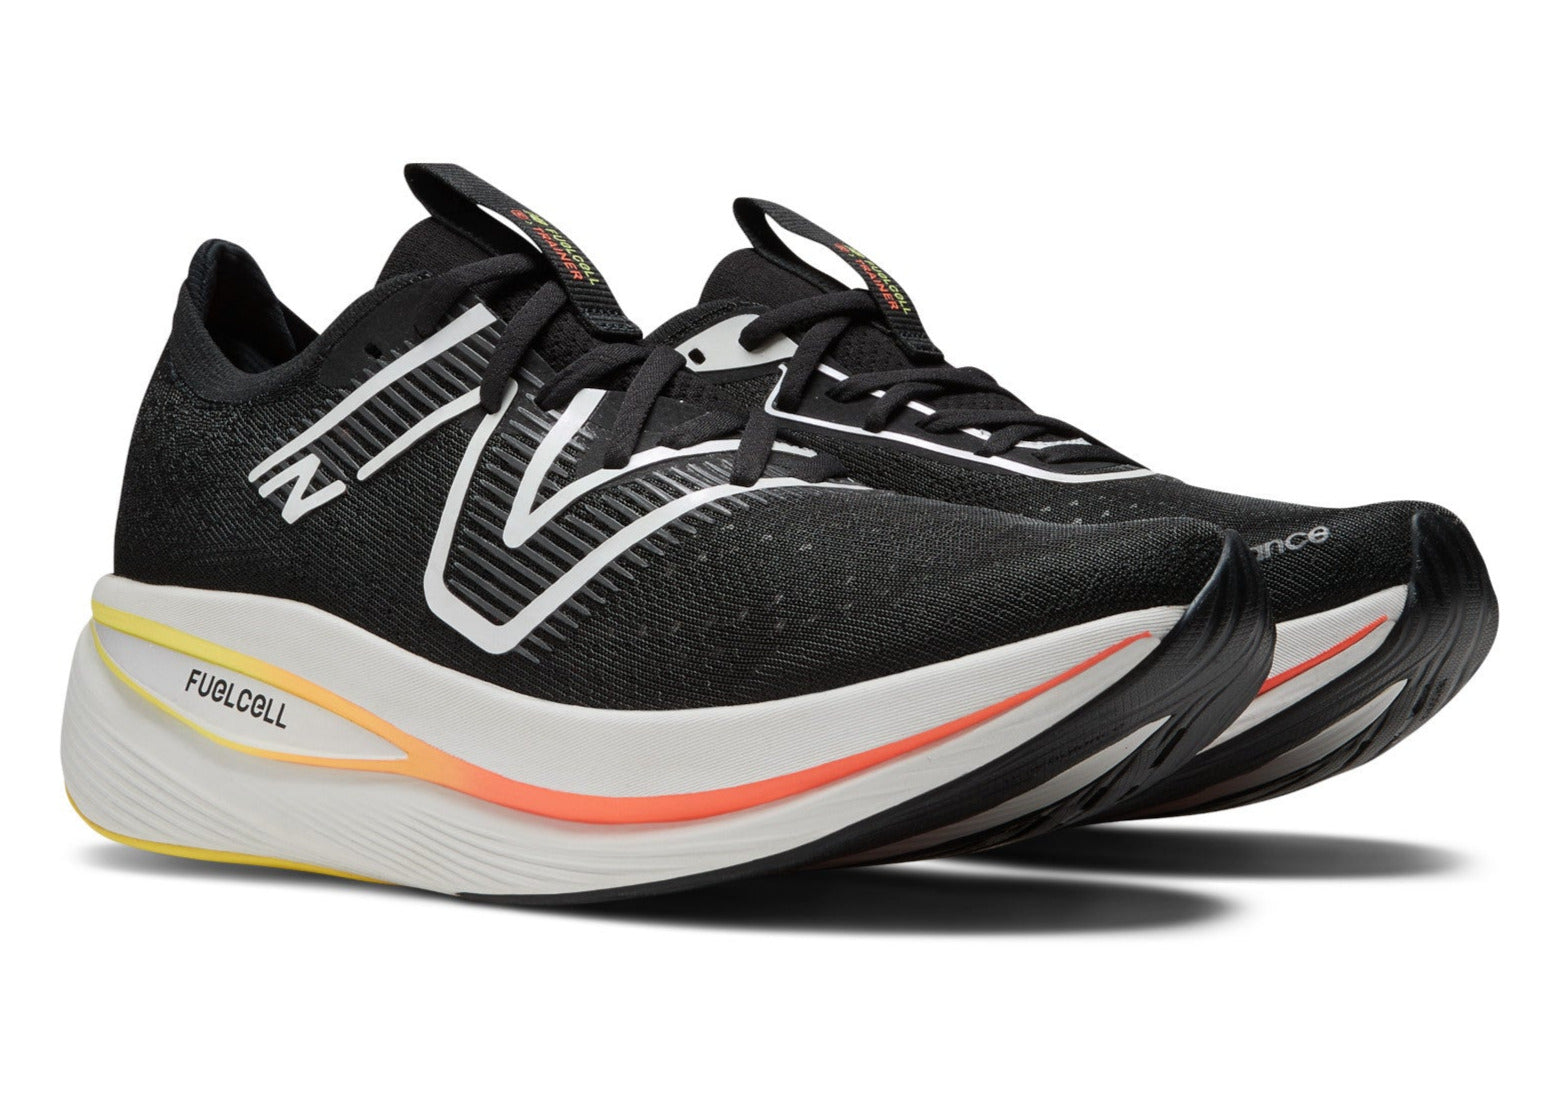 New Balance Men's FuelCell SuperComp Trainer V2 Running Shoes - Orange/Black (Size 9.5)